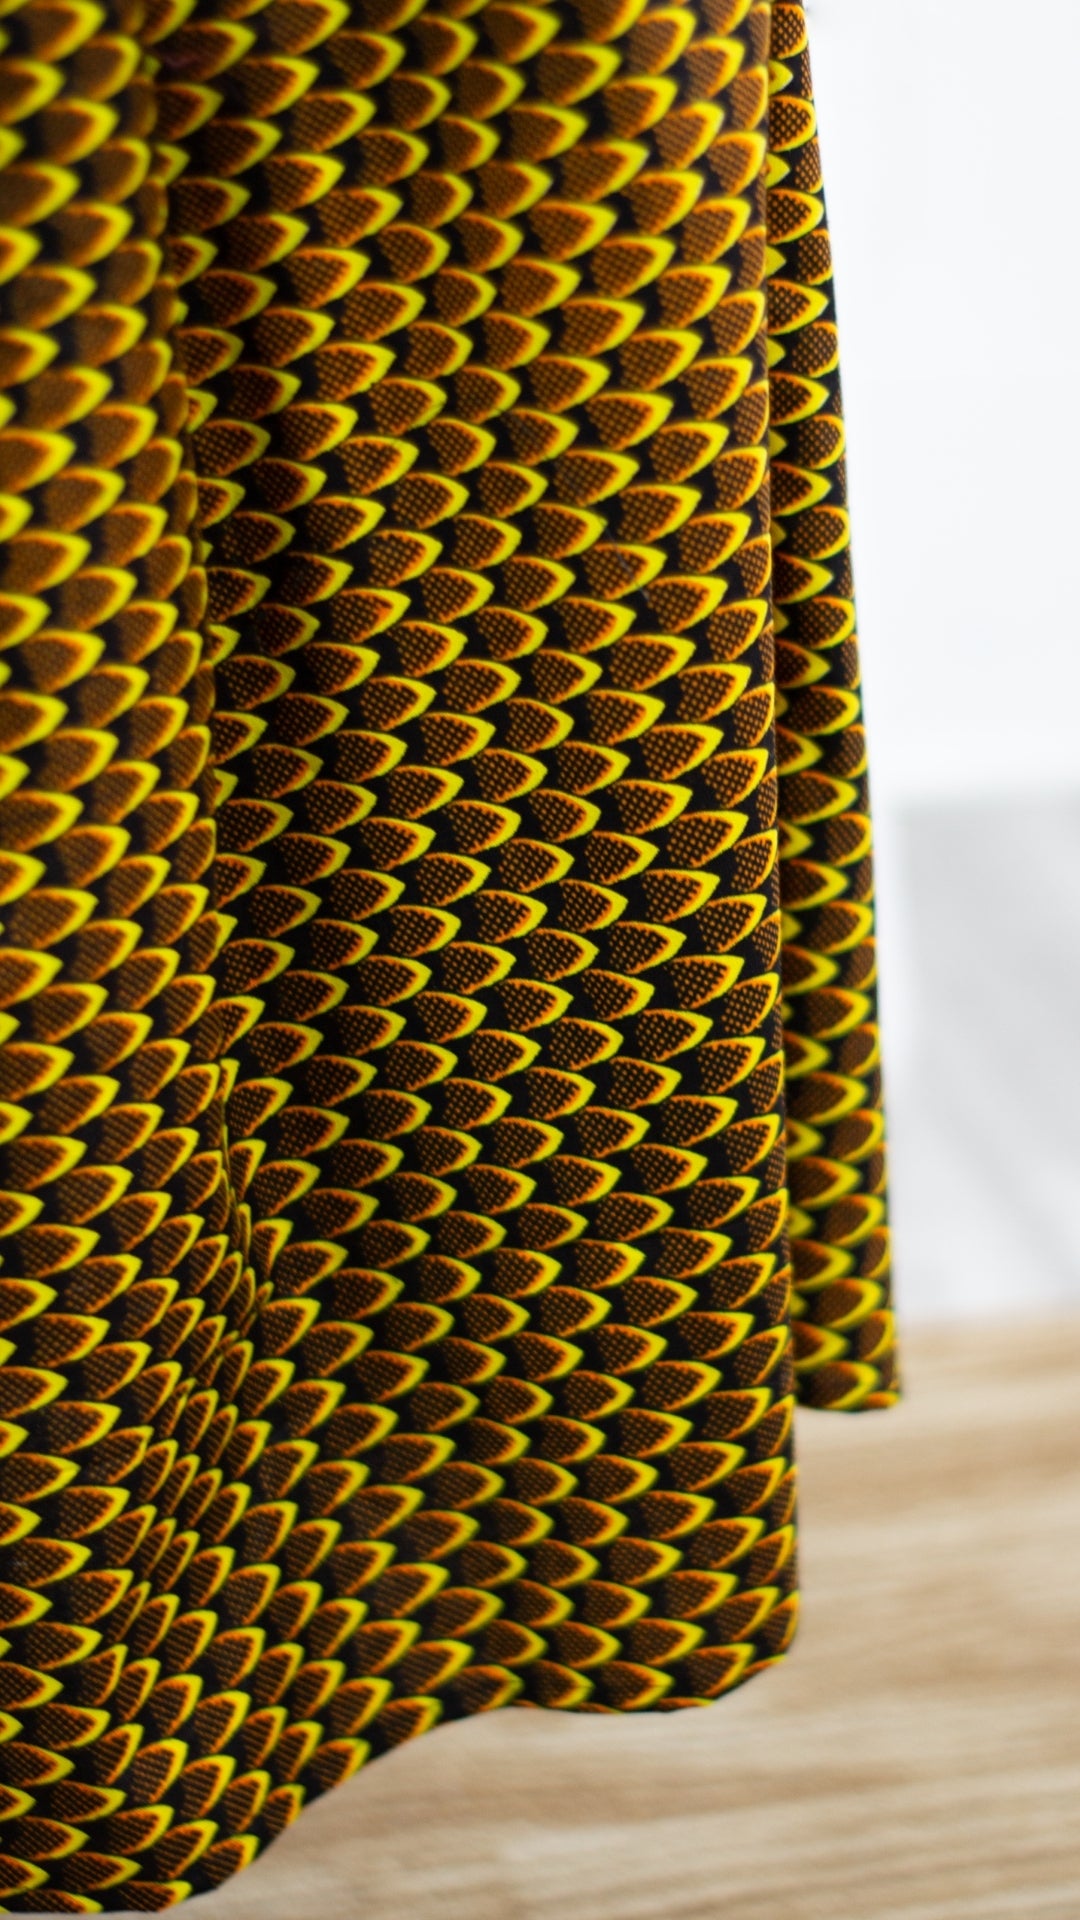 A close-up view highlighting the details of a yellow African print skirt, showcasing the vibrant patterns of the African print fabric.